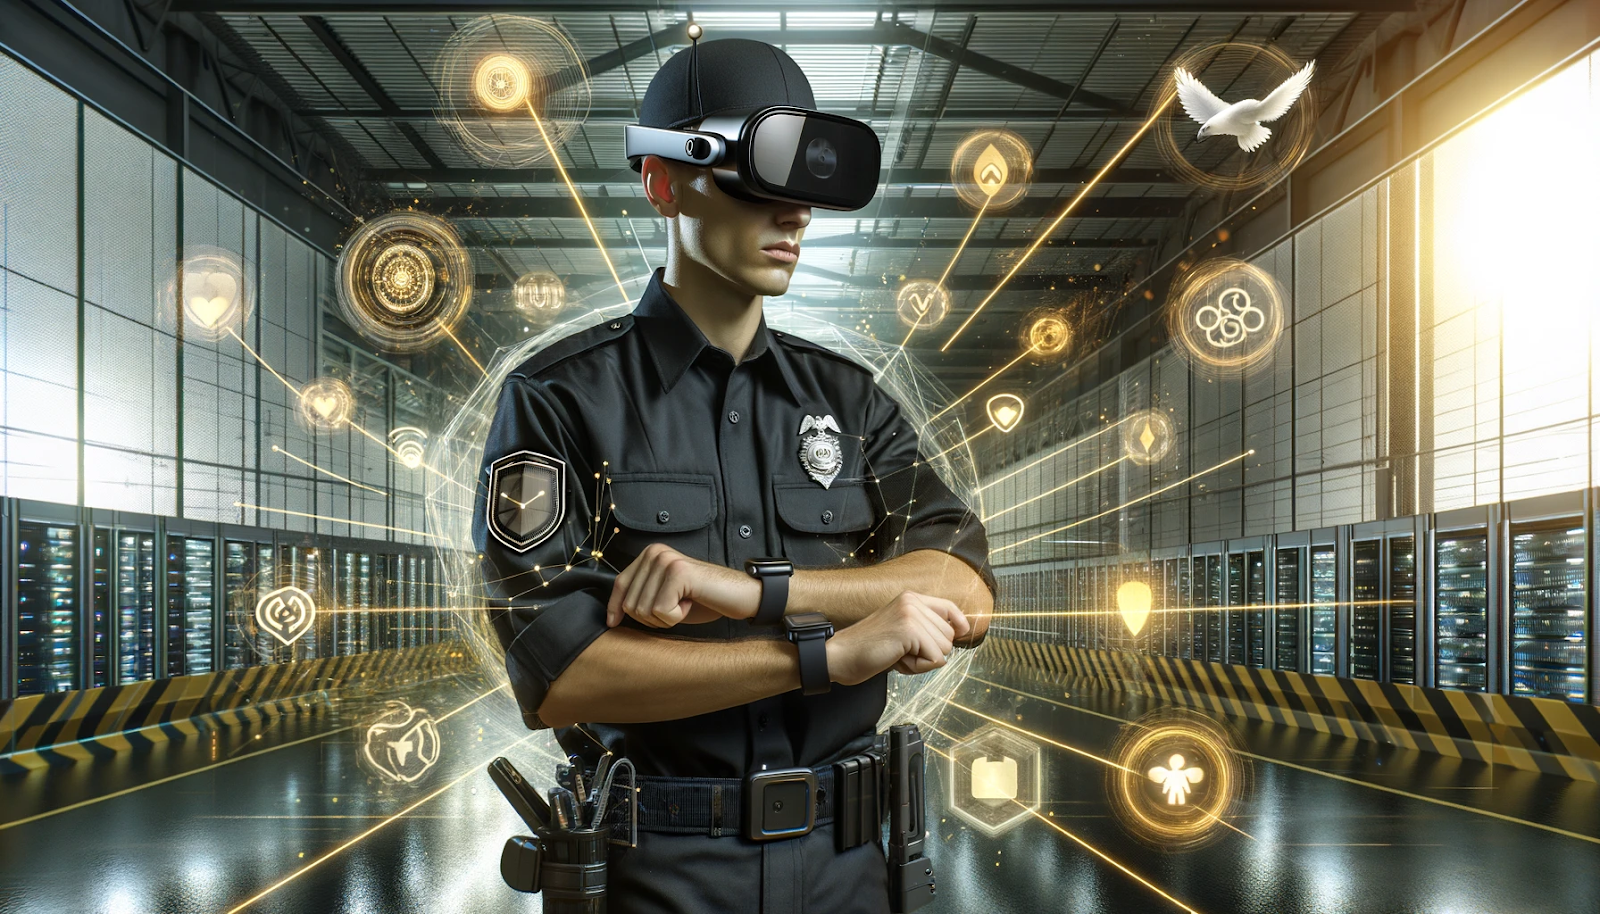 A security guard equipped with wearable technology including a smartwatch, AR glasses, and a body cam, actively monitoring a high-security facility. 